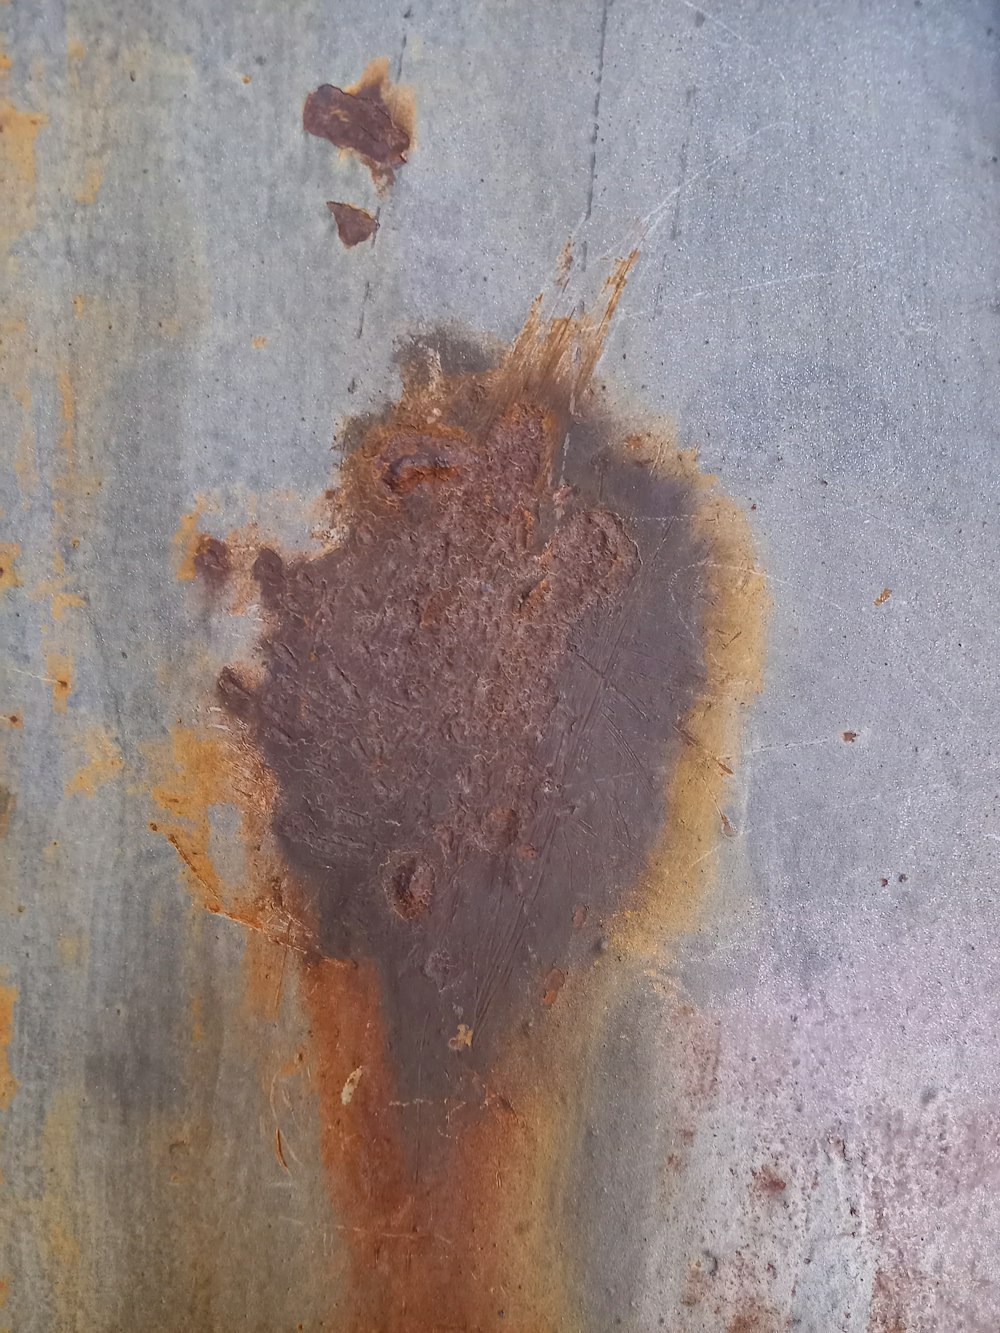 a rusted metal surface with a brown substance on it